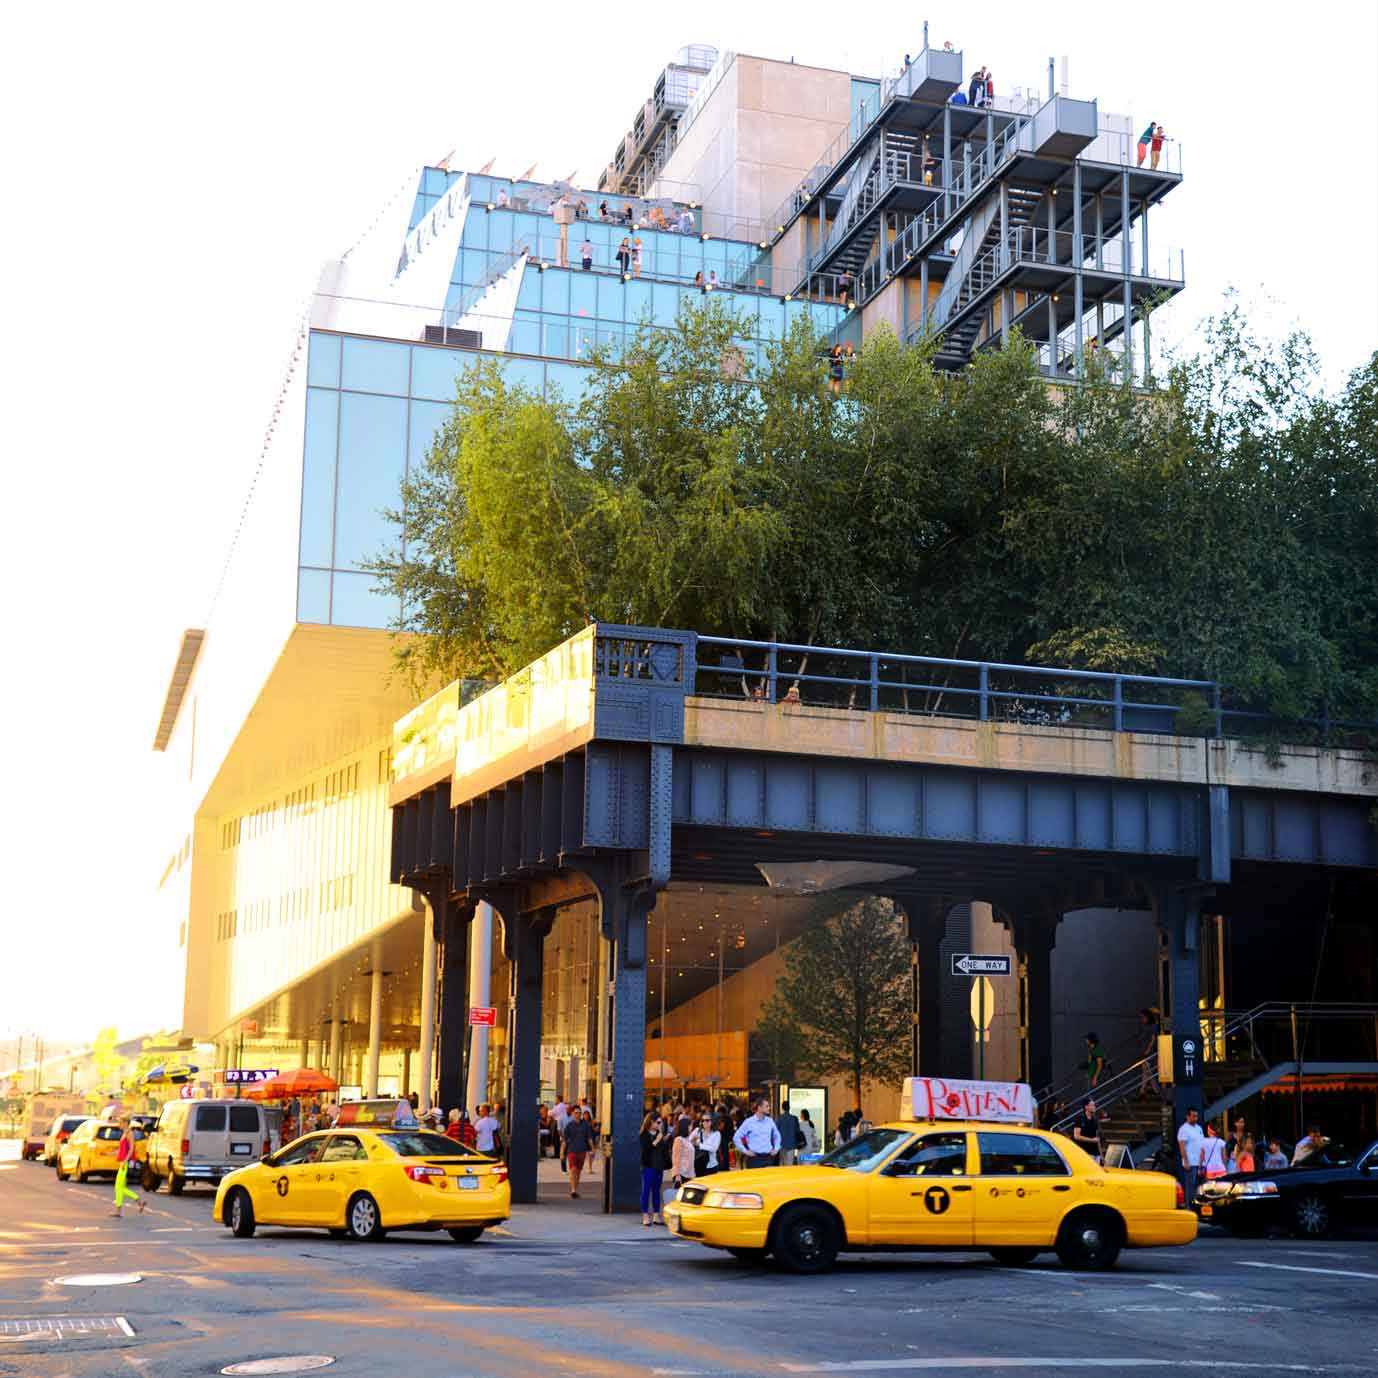 whitneymuseumhighline-chelsea-e-meatpacking-district